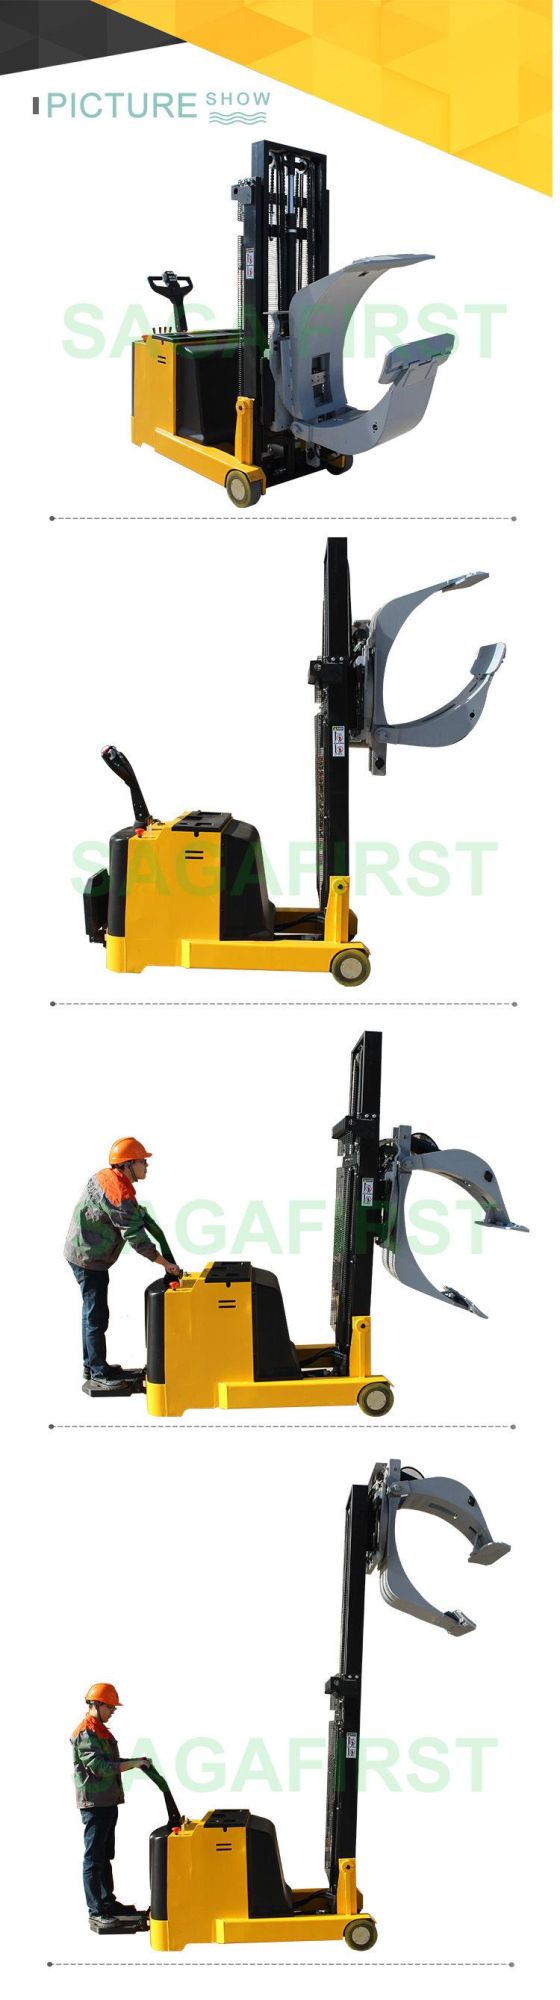 Sagafirst Electric Paper Roll Rotating Clamp Drum Loader Lifter with CE